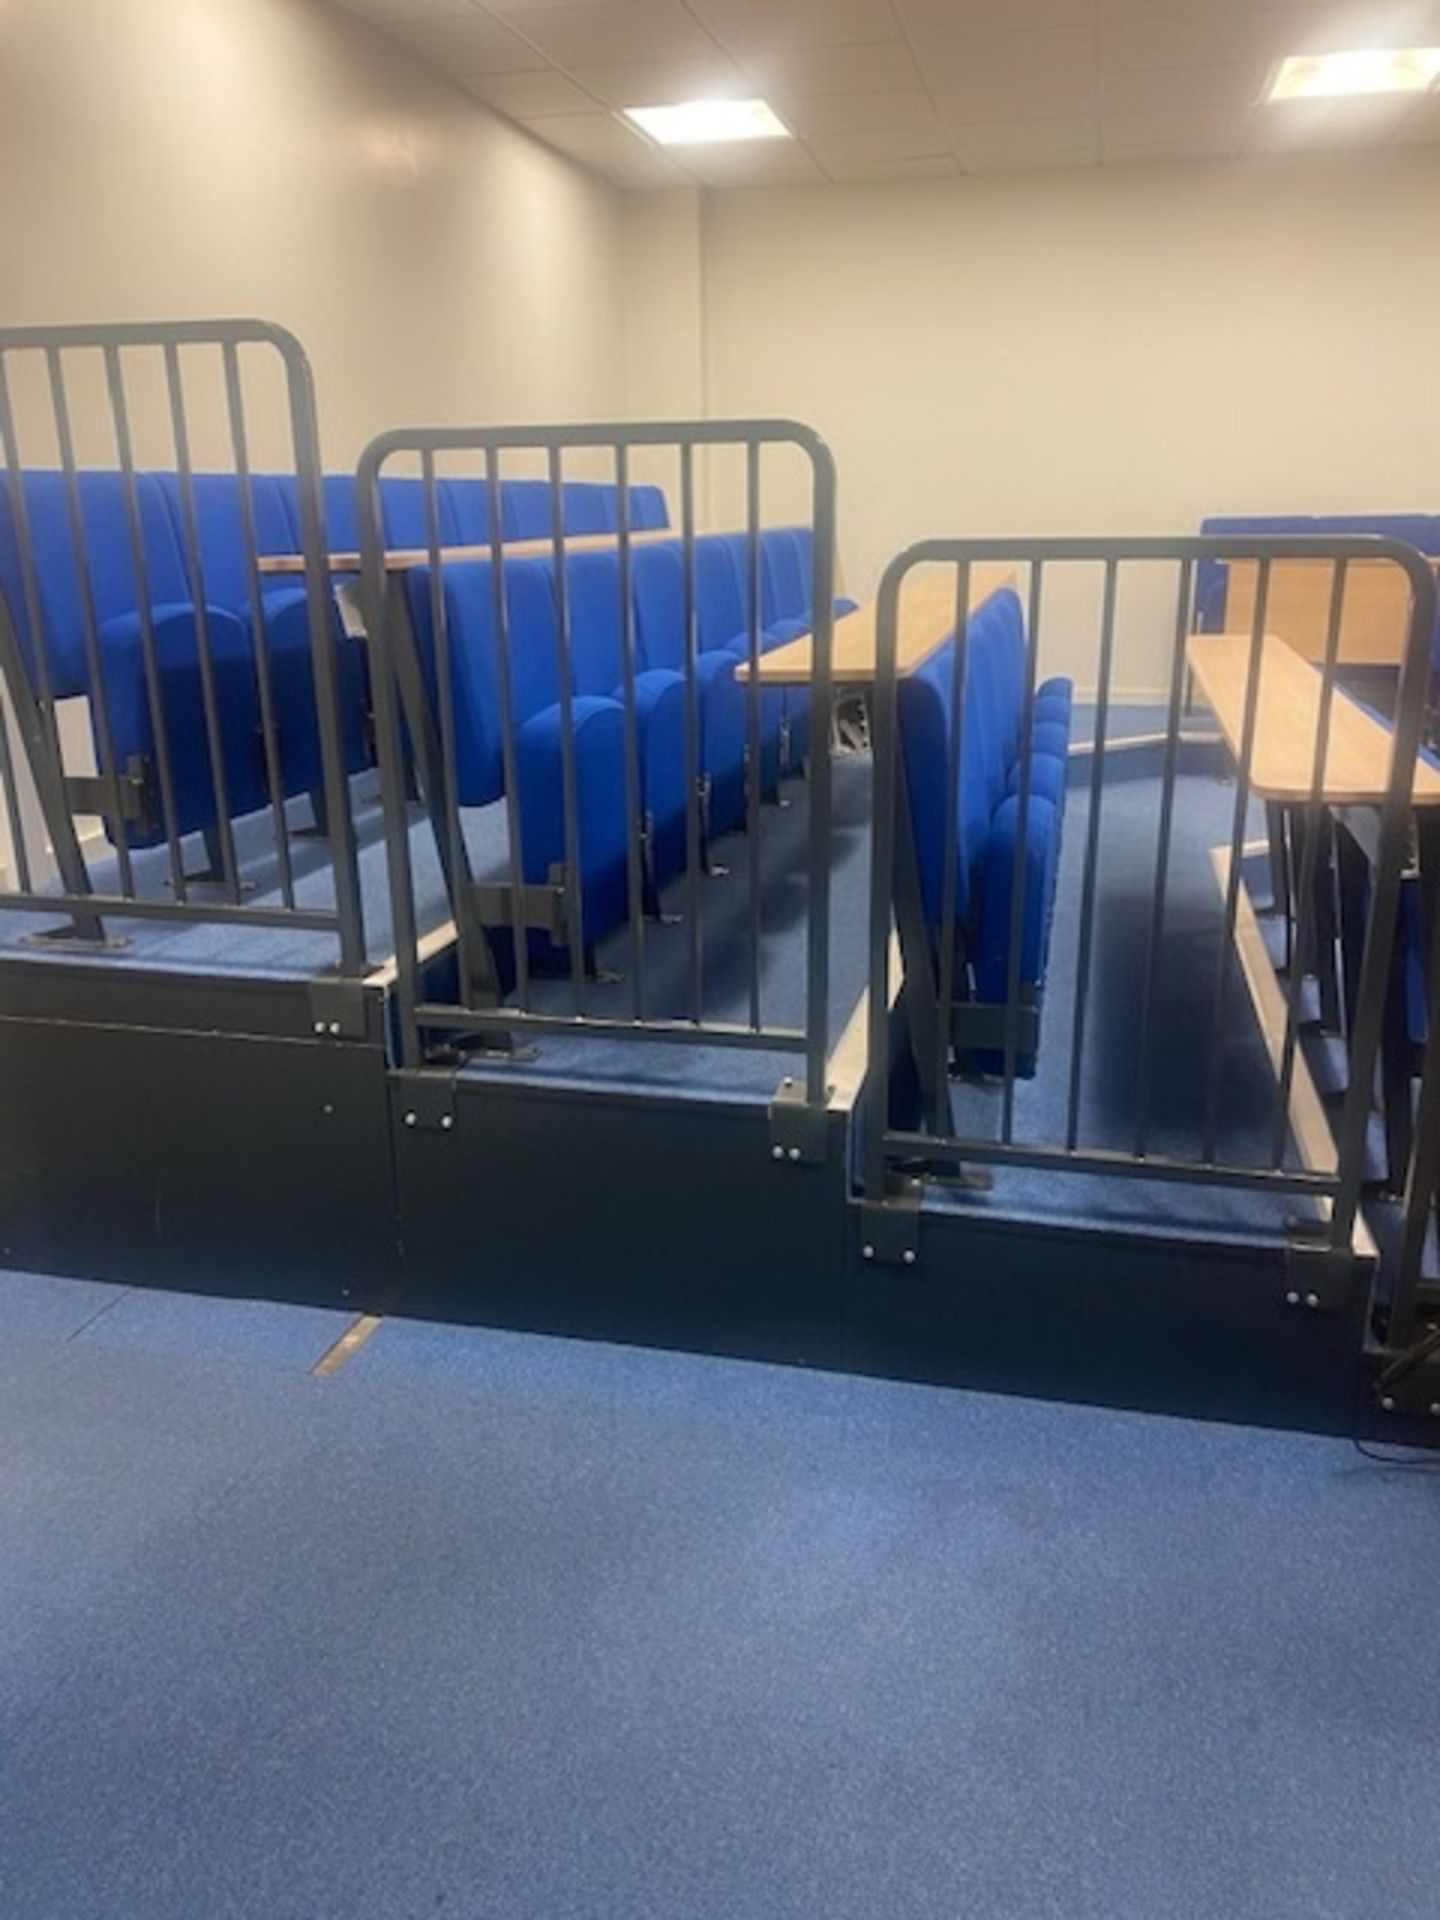 Stage seating With Built In Desks - Image 2 of 10